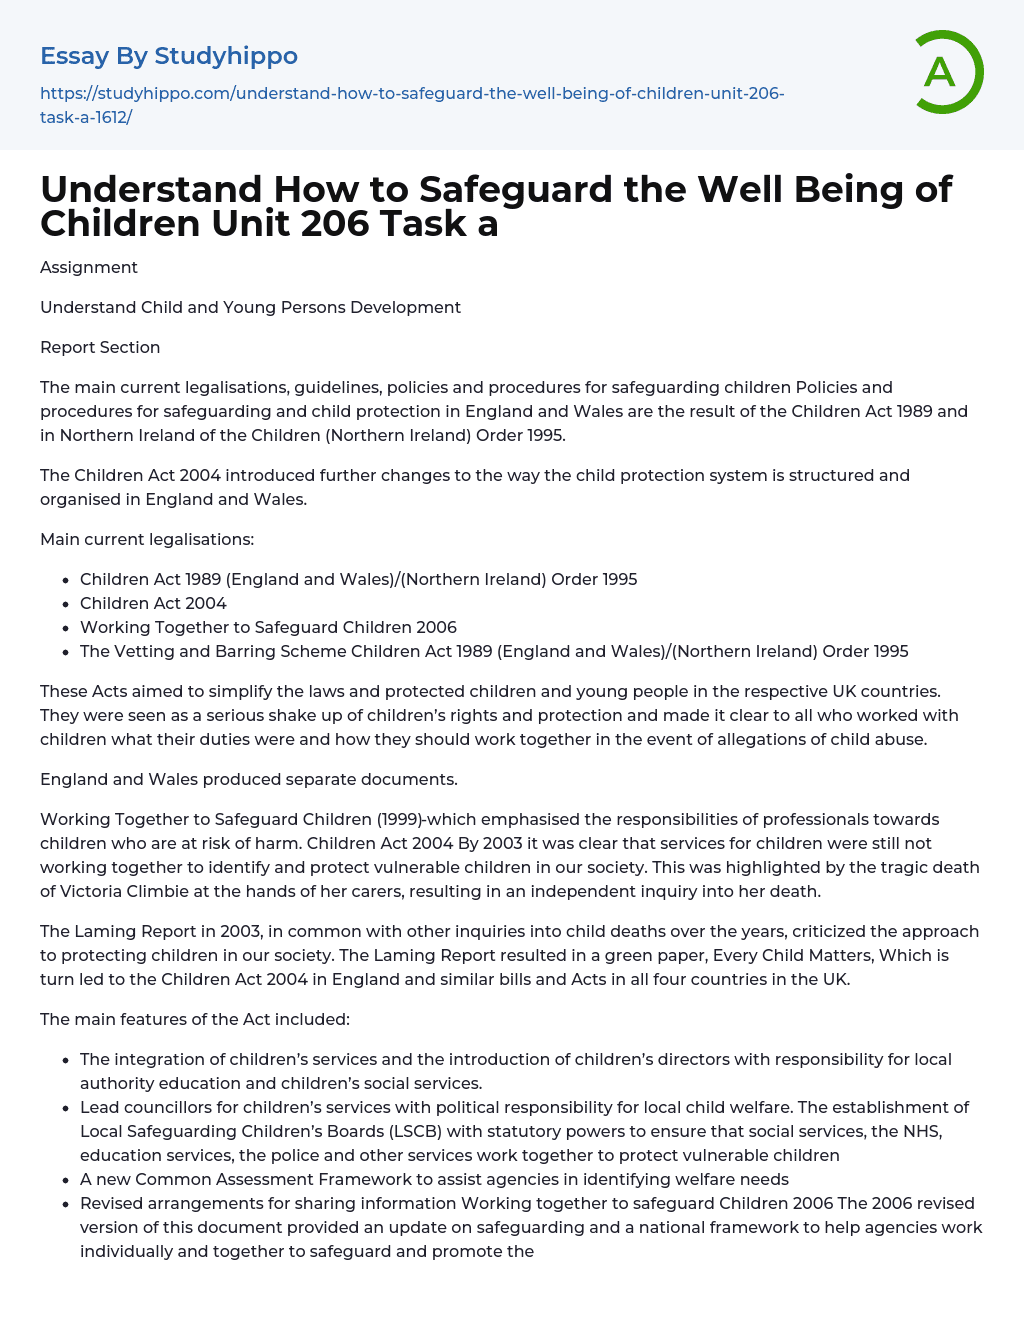 Understand How to Safeguard the Well Being of Children Unit 206 Task a Essay Example